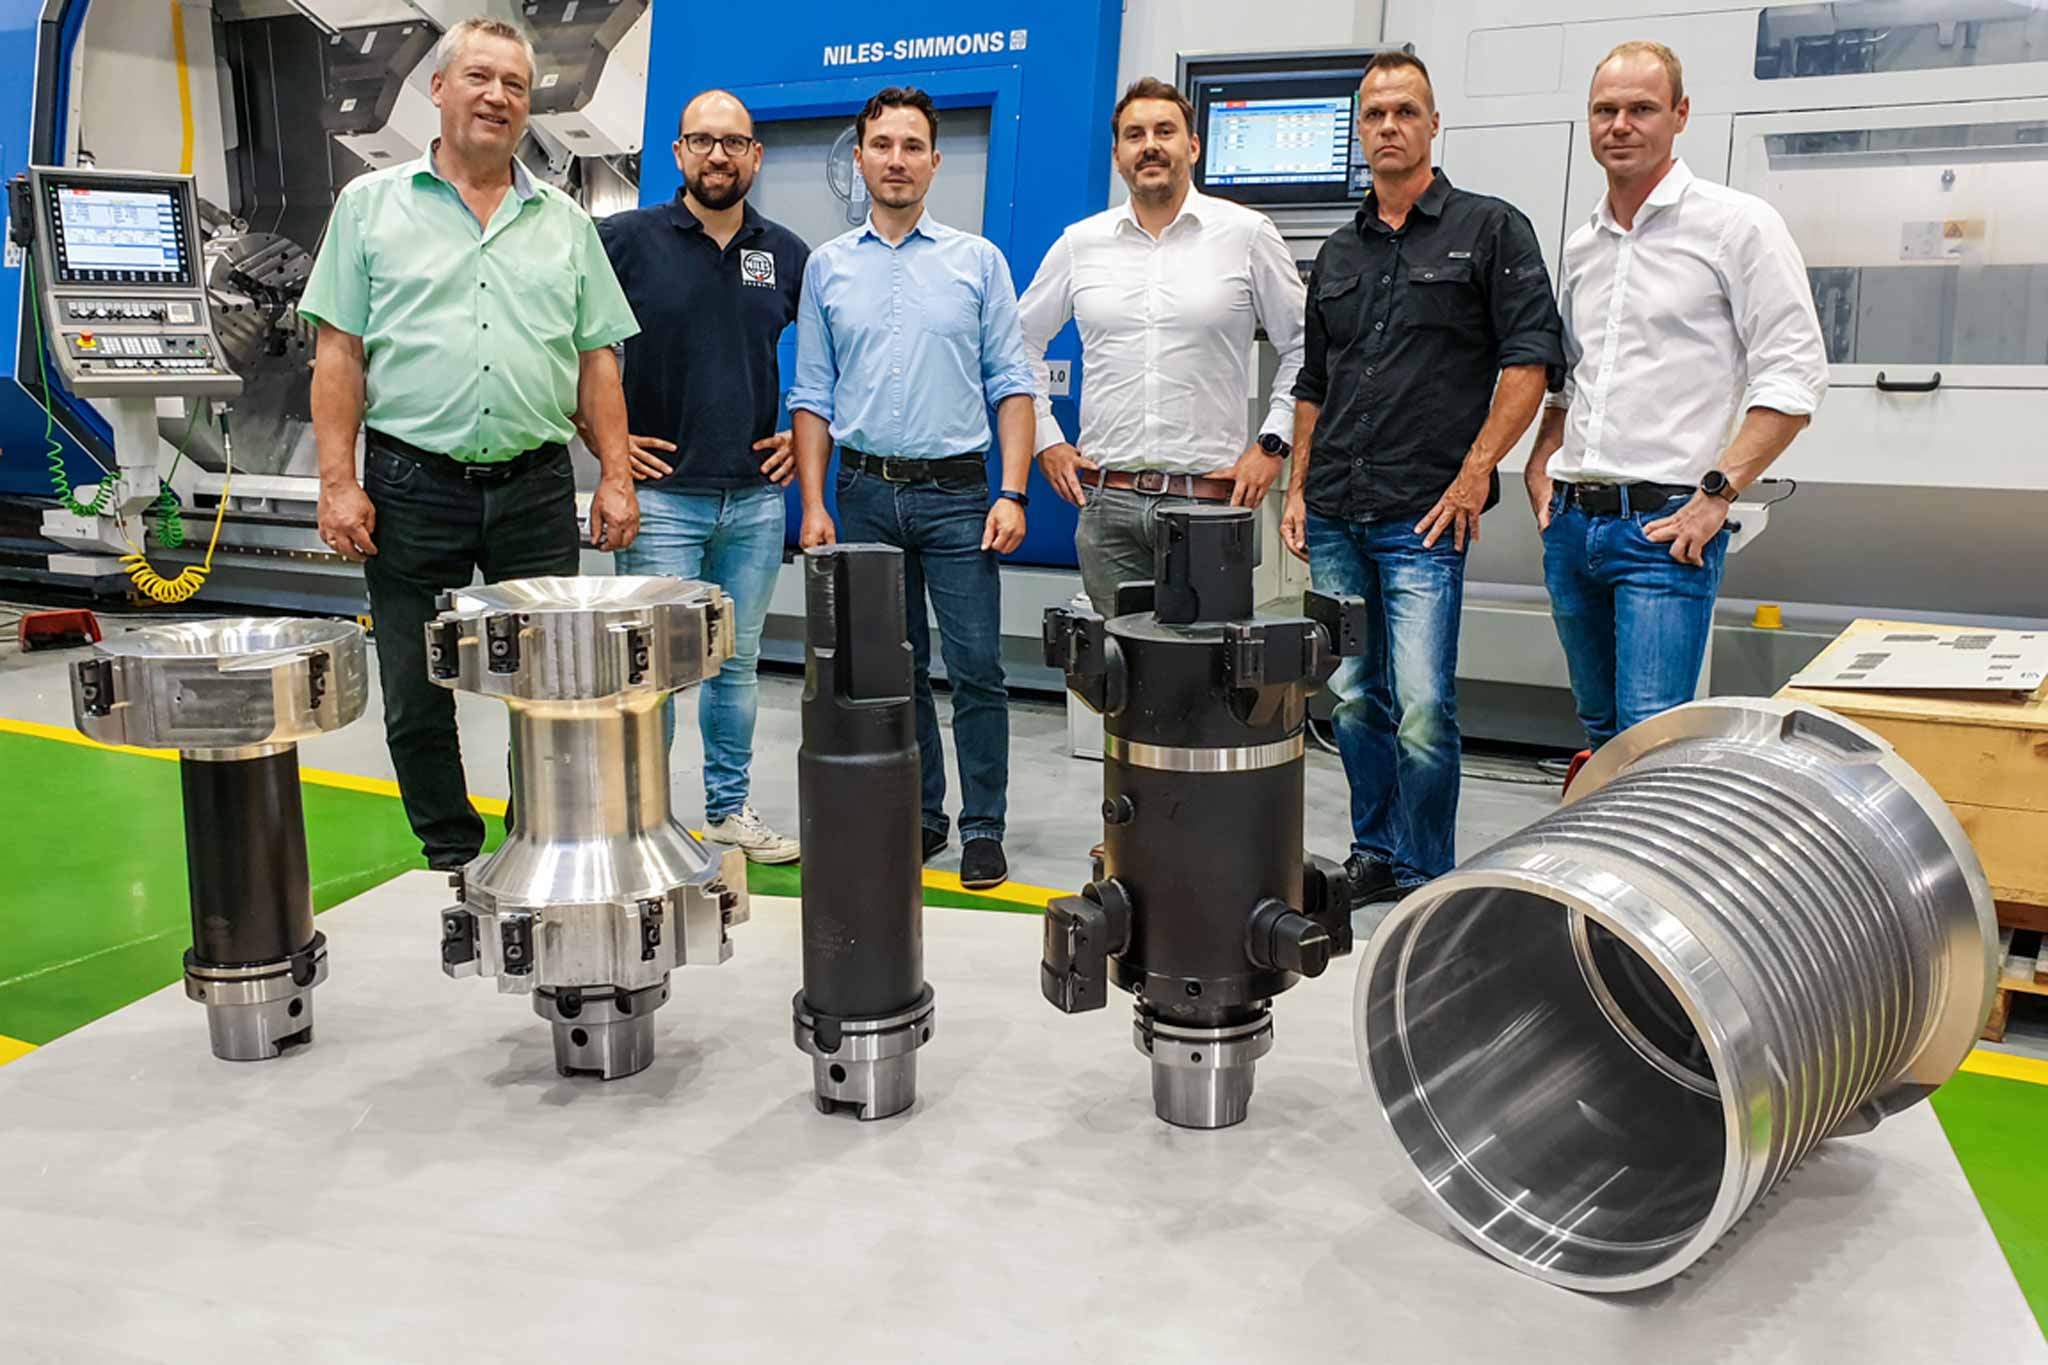 Thomas Lötzsch, Christian Winkler and Daniel Pilz from NILES-SIMMONS with André Ranke, Axel Schwarze and Heiko Süß from MAPAL.